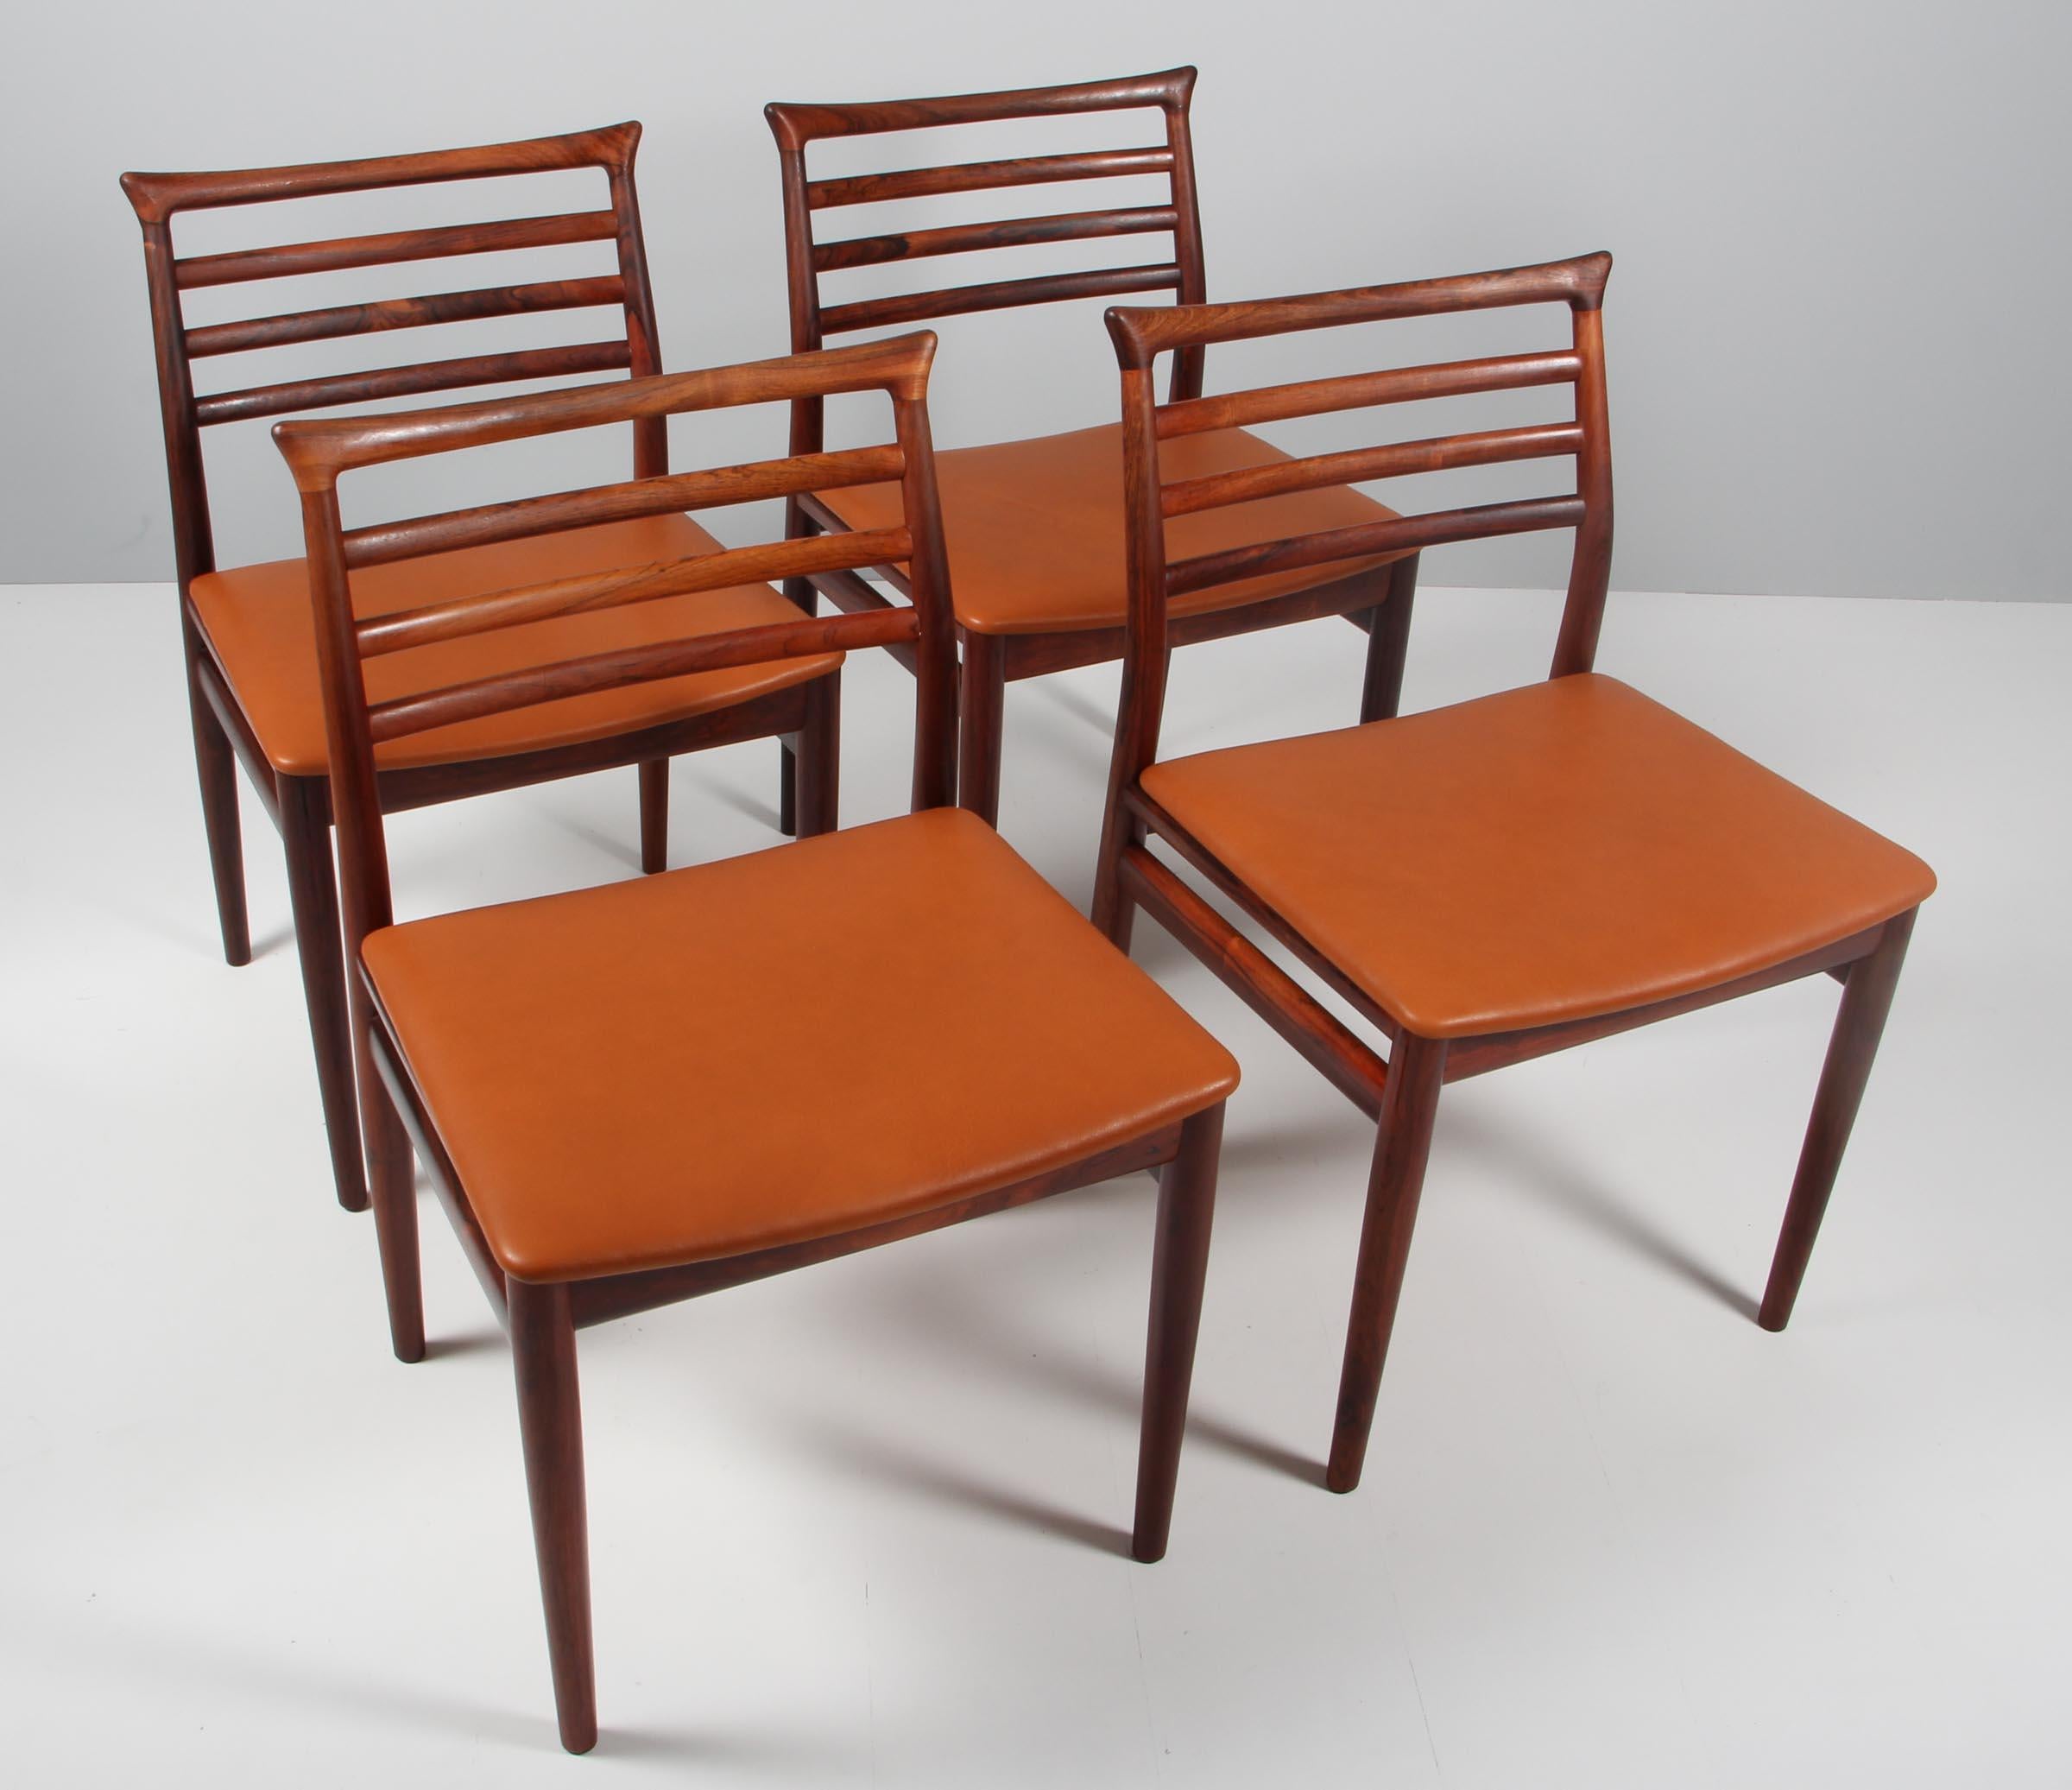 Erling Torvits set of four dining chairs in rosewood. New upholstered with tan aniline leather.

Made by Sorø Stolefabrik.